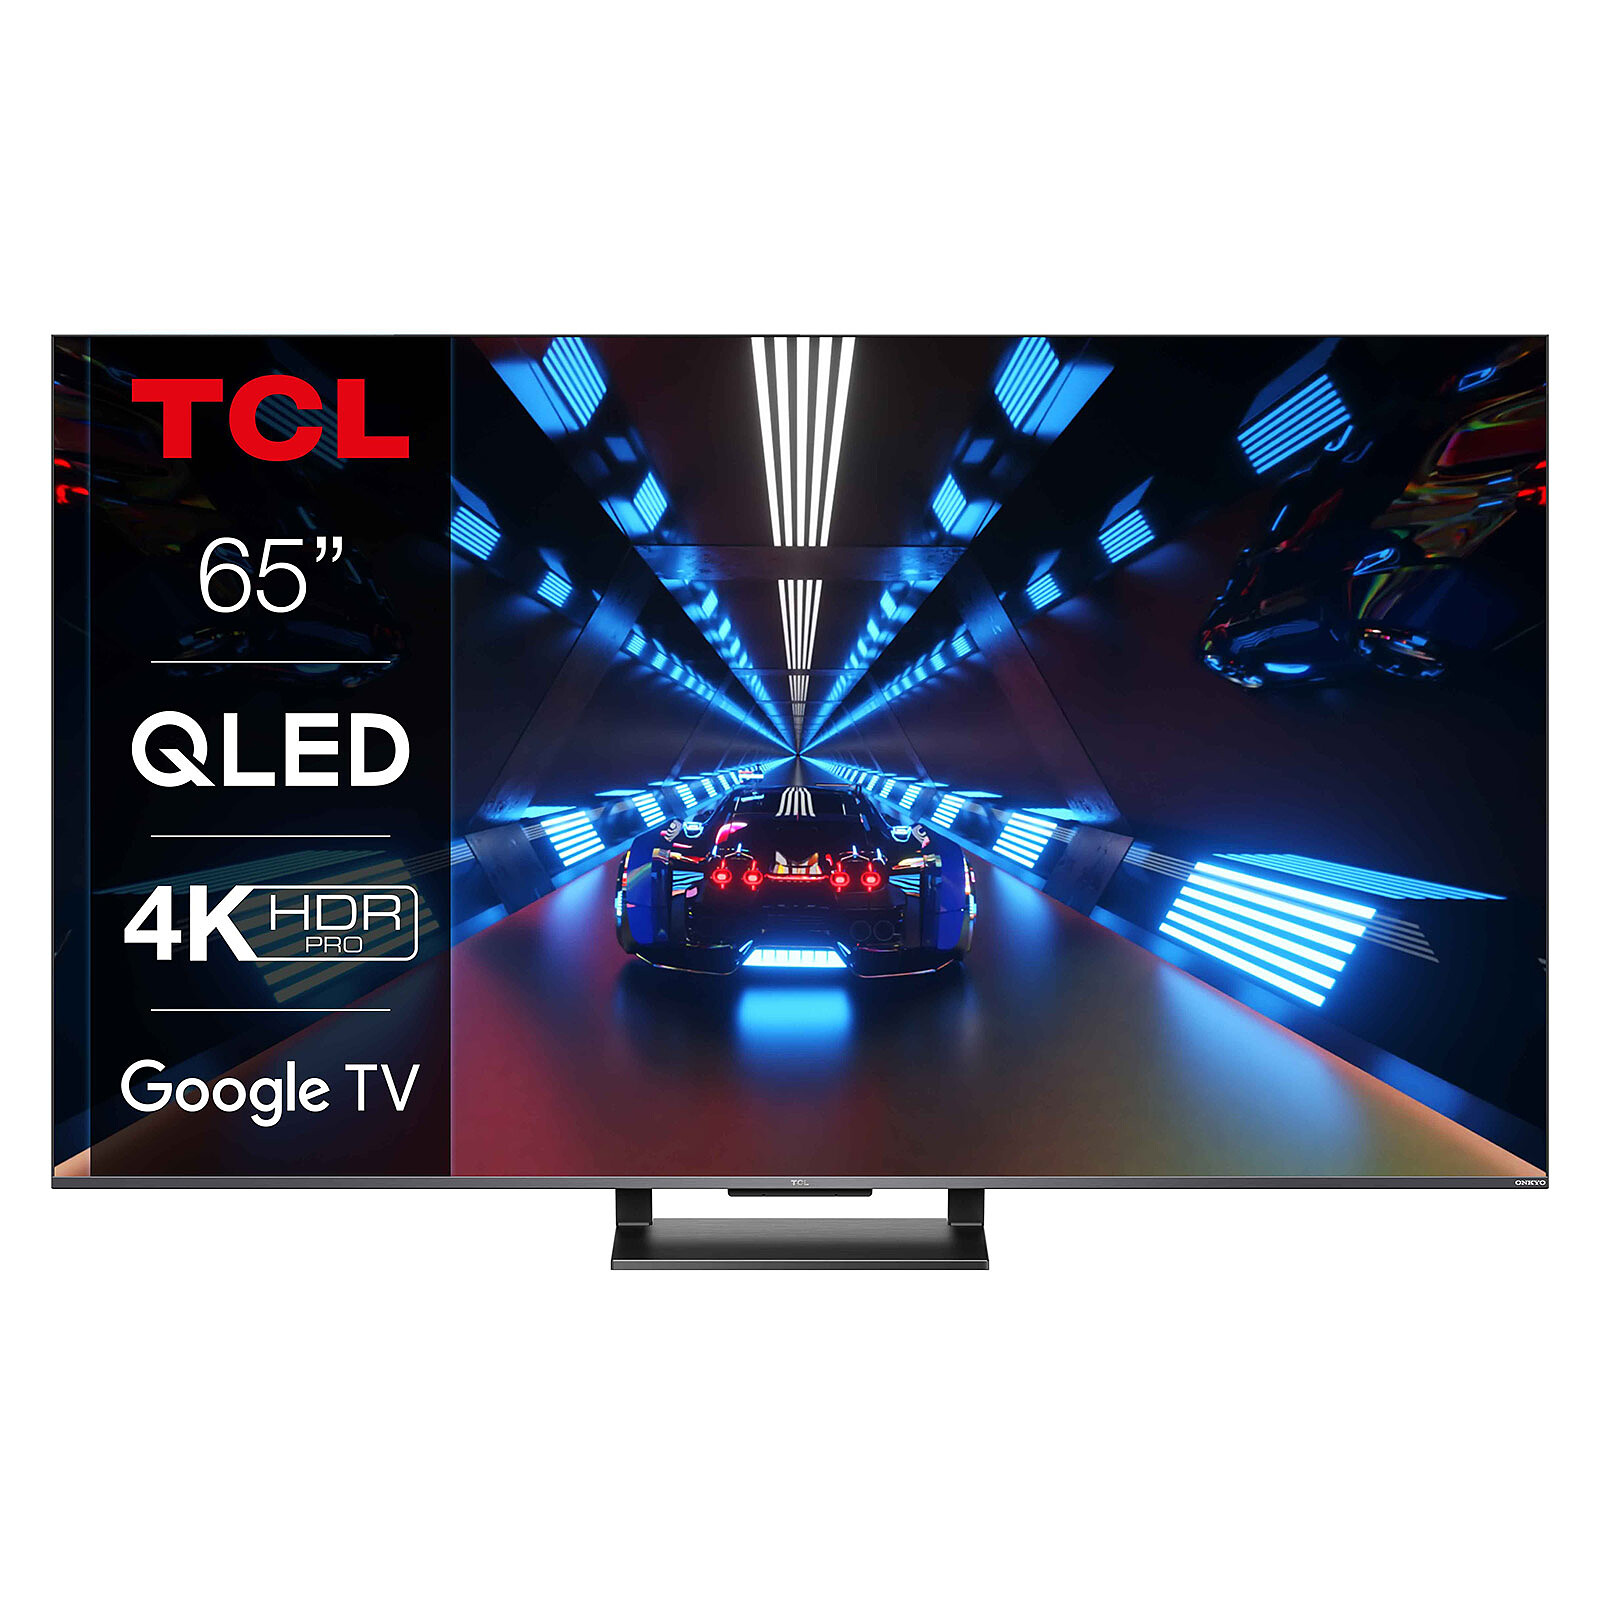 TCL 4K QLED TV with fire TV and 4K HDR Pro